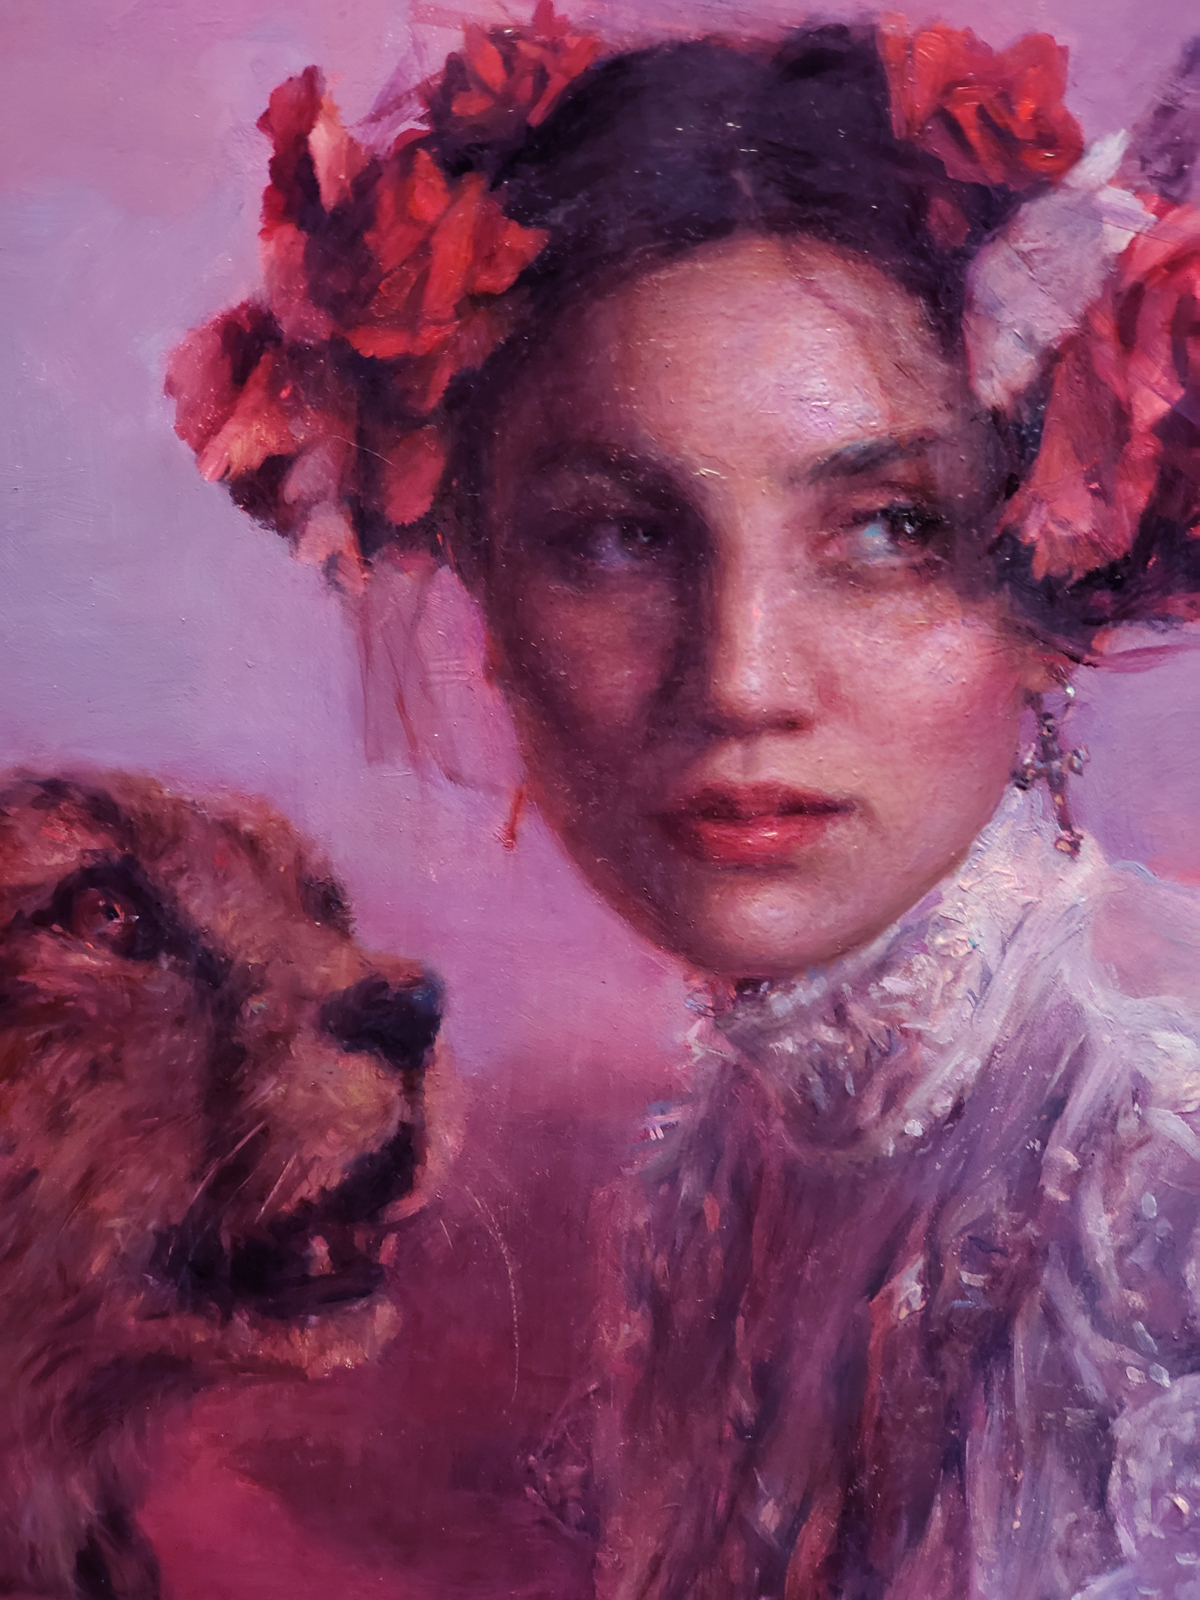 American Legacy Fine Arts presents "Wild Rose" a painting by Natalia Fabia.